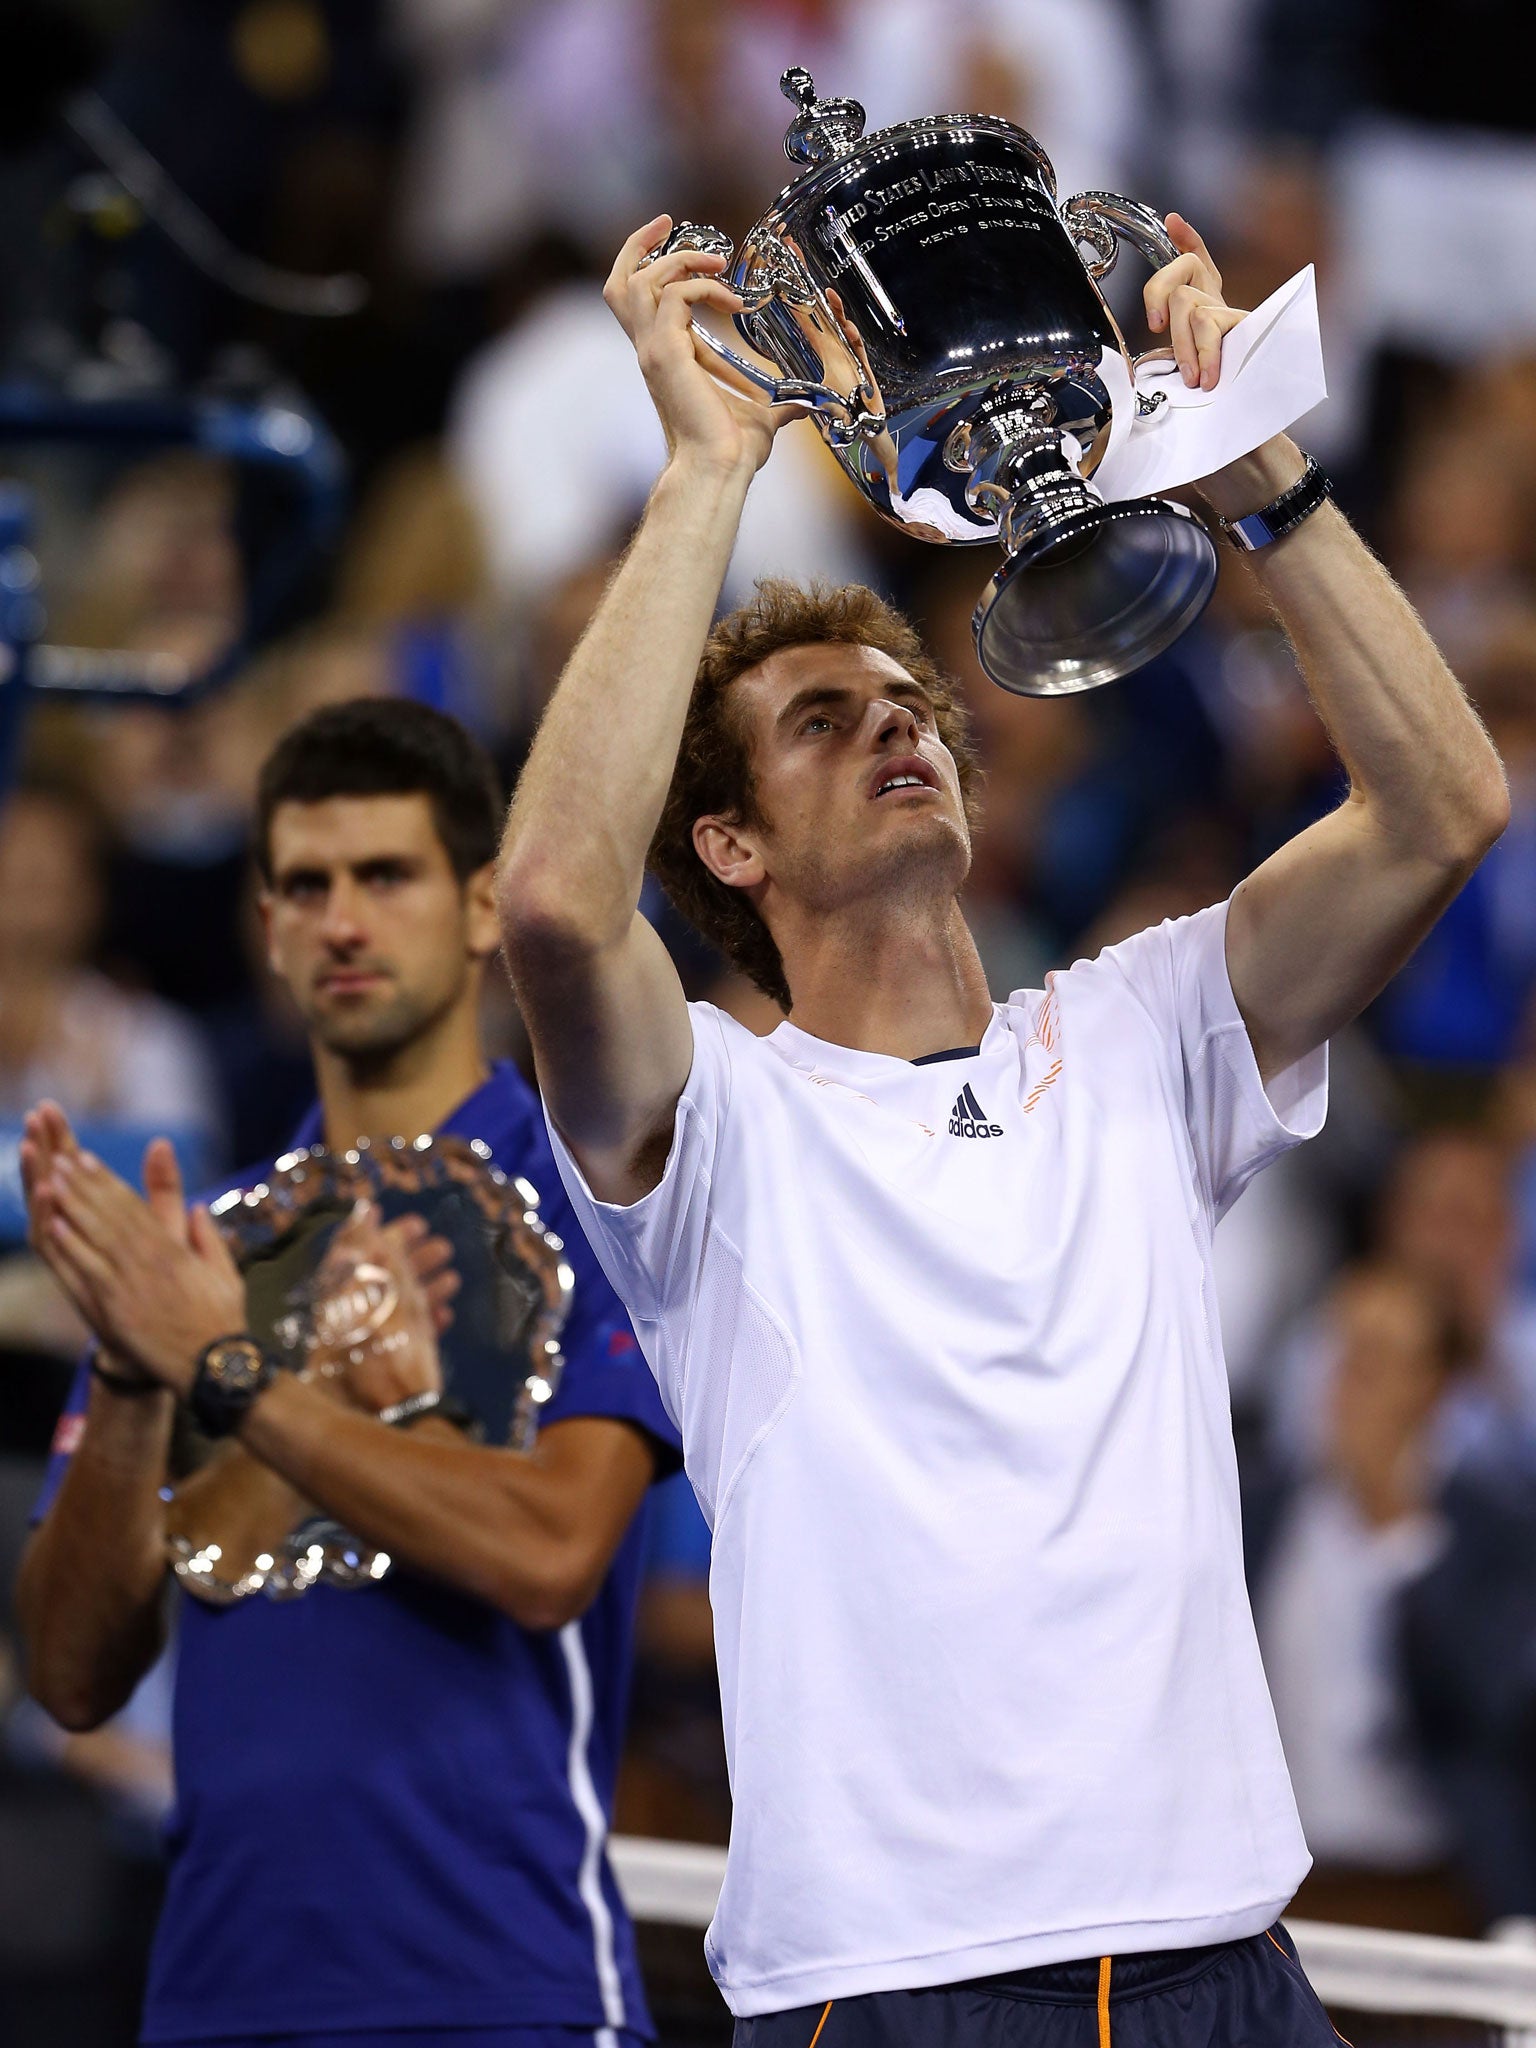 The last time the world's top two played, Murray won the US Open